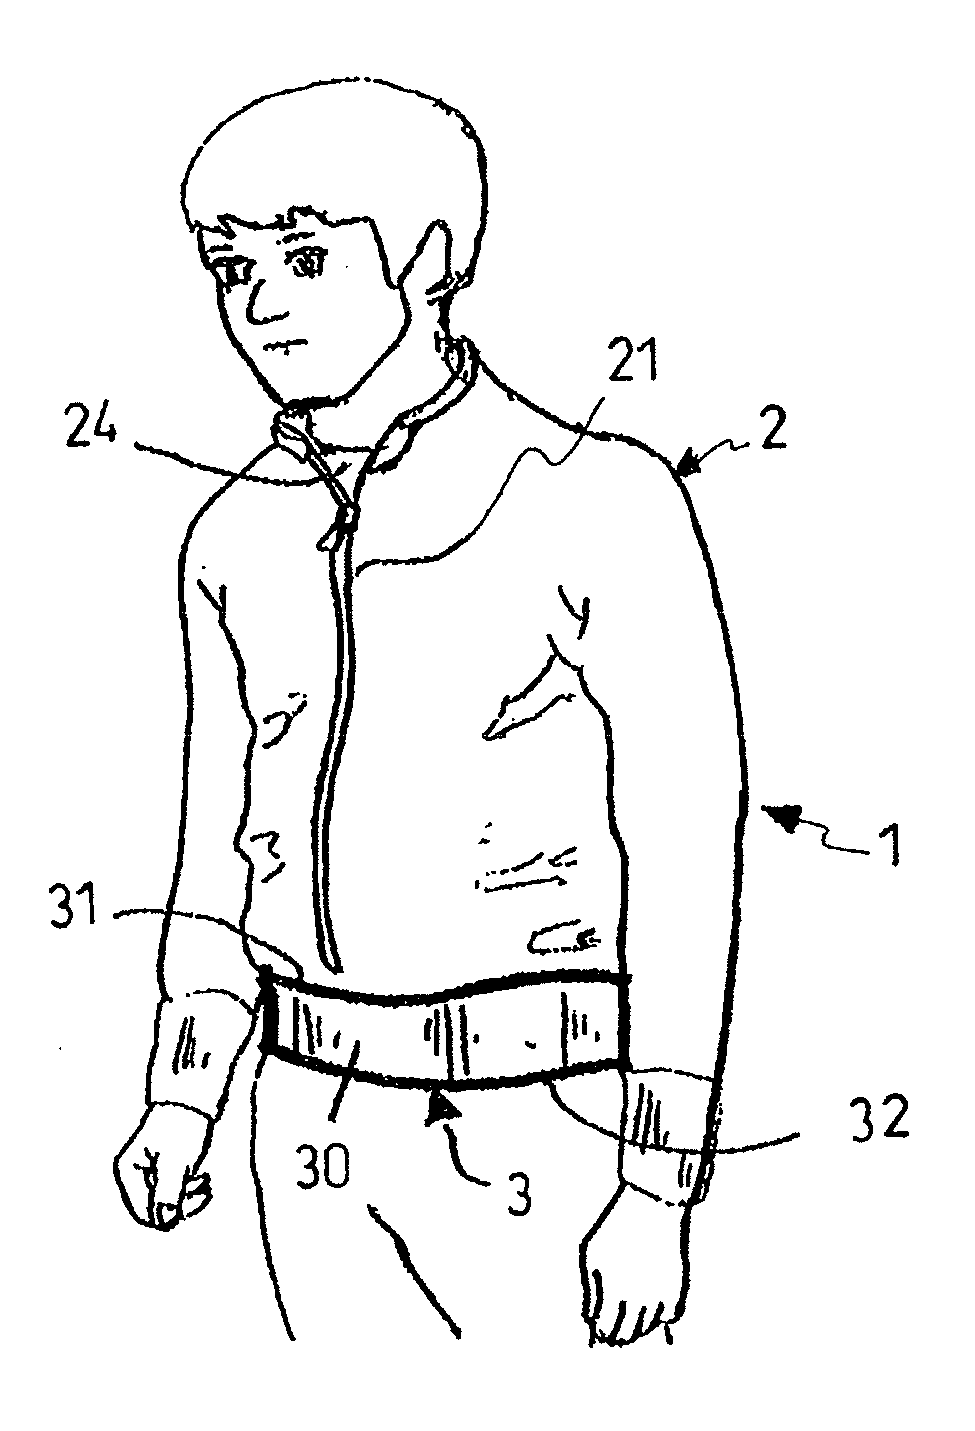 Article of clothing facilitating its own storage during use